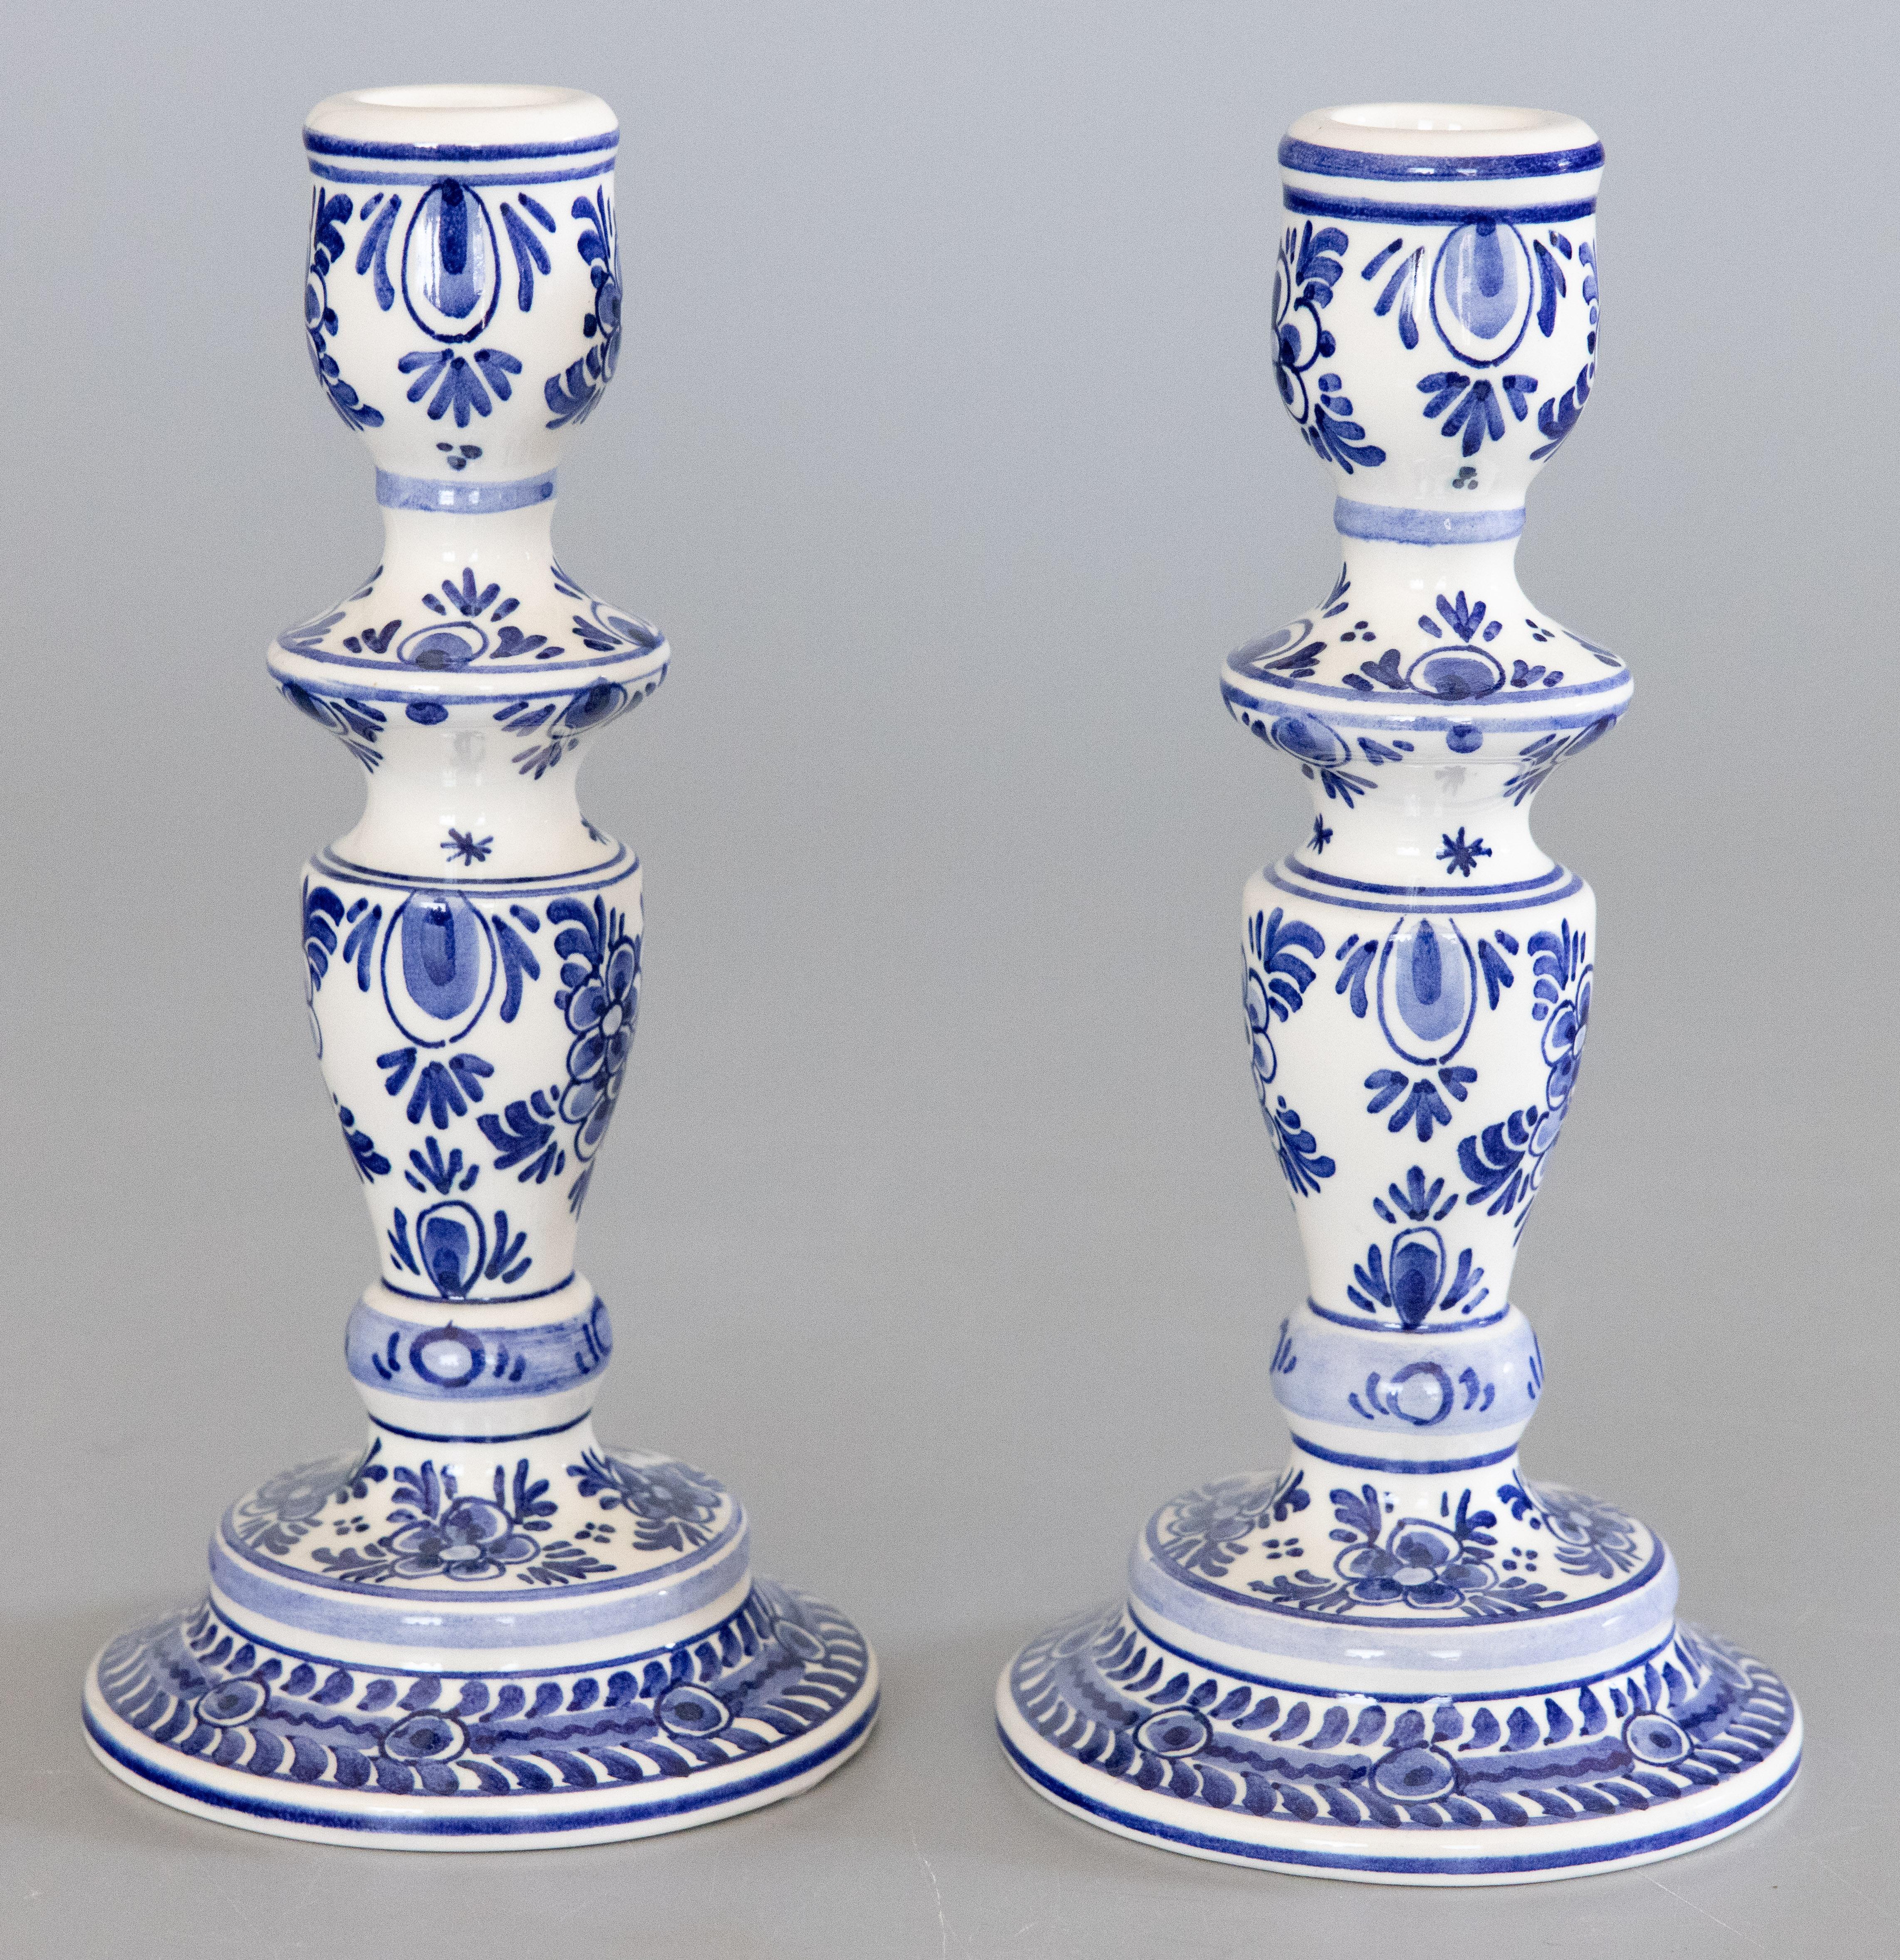 A lovely pair of Mid-Century Dutch Delft faience candlesticks. Maker's mark on reverse. These fine candlesticks are hand painted with a floral design in the traditional Delft colors of cobalt blue and white.

DIMENSIONS
4ʺW × 4ʺD × 8.25ʺH